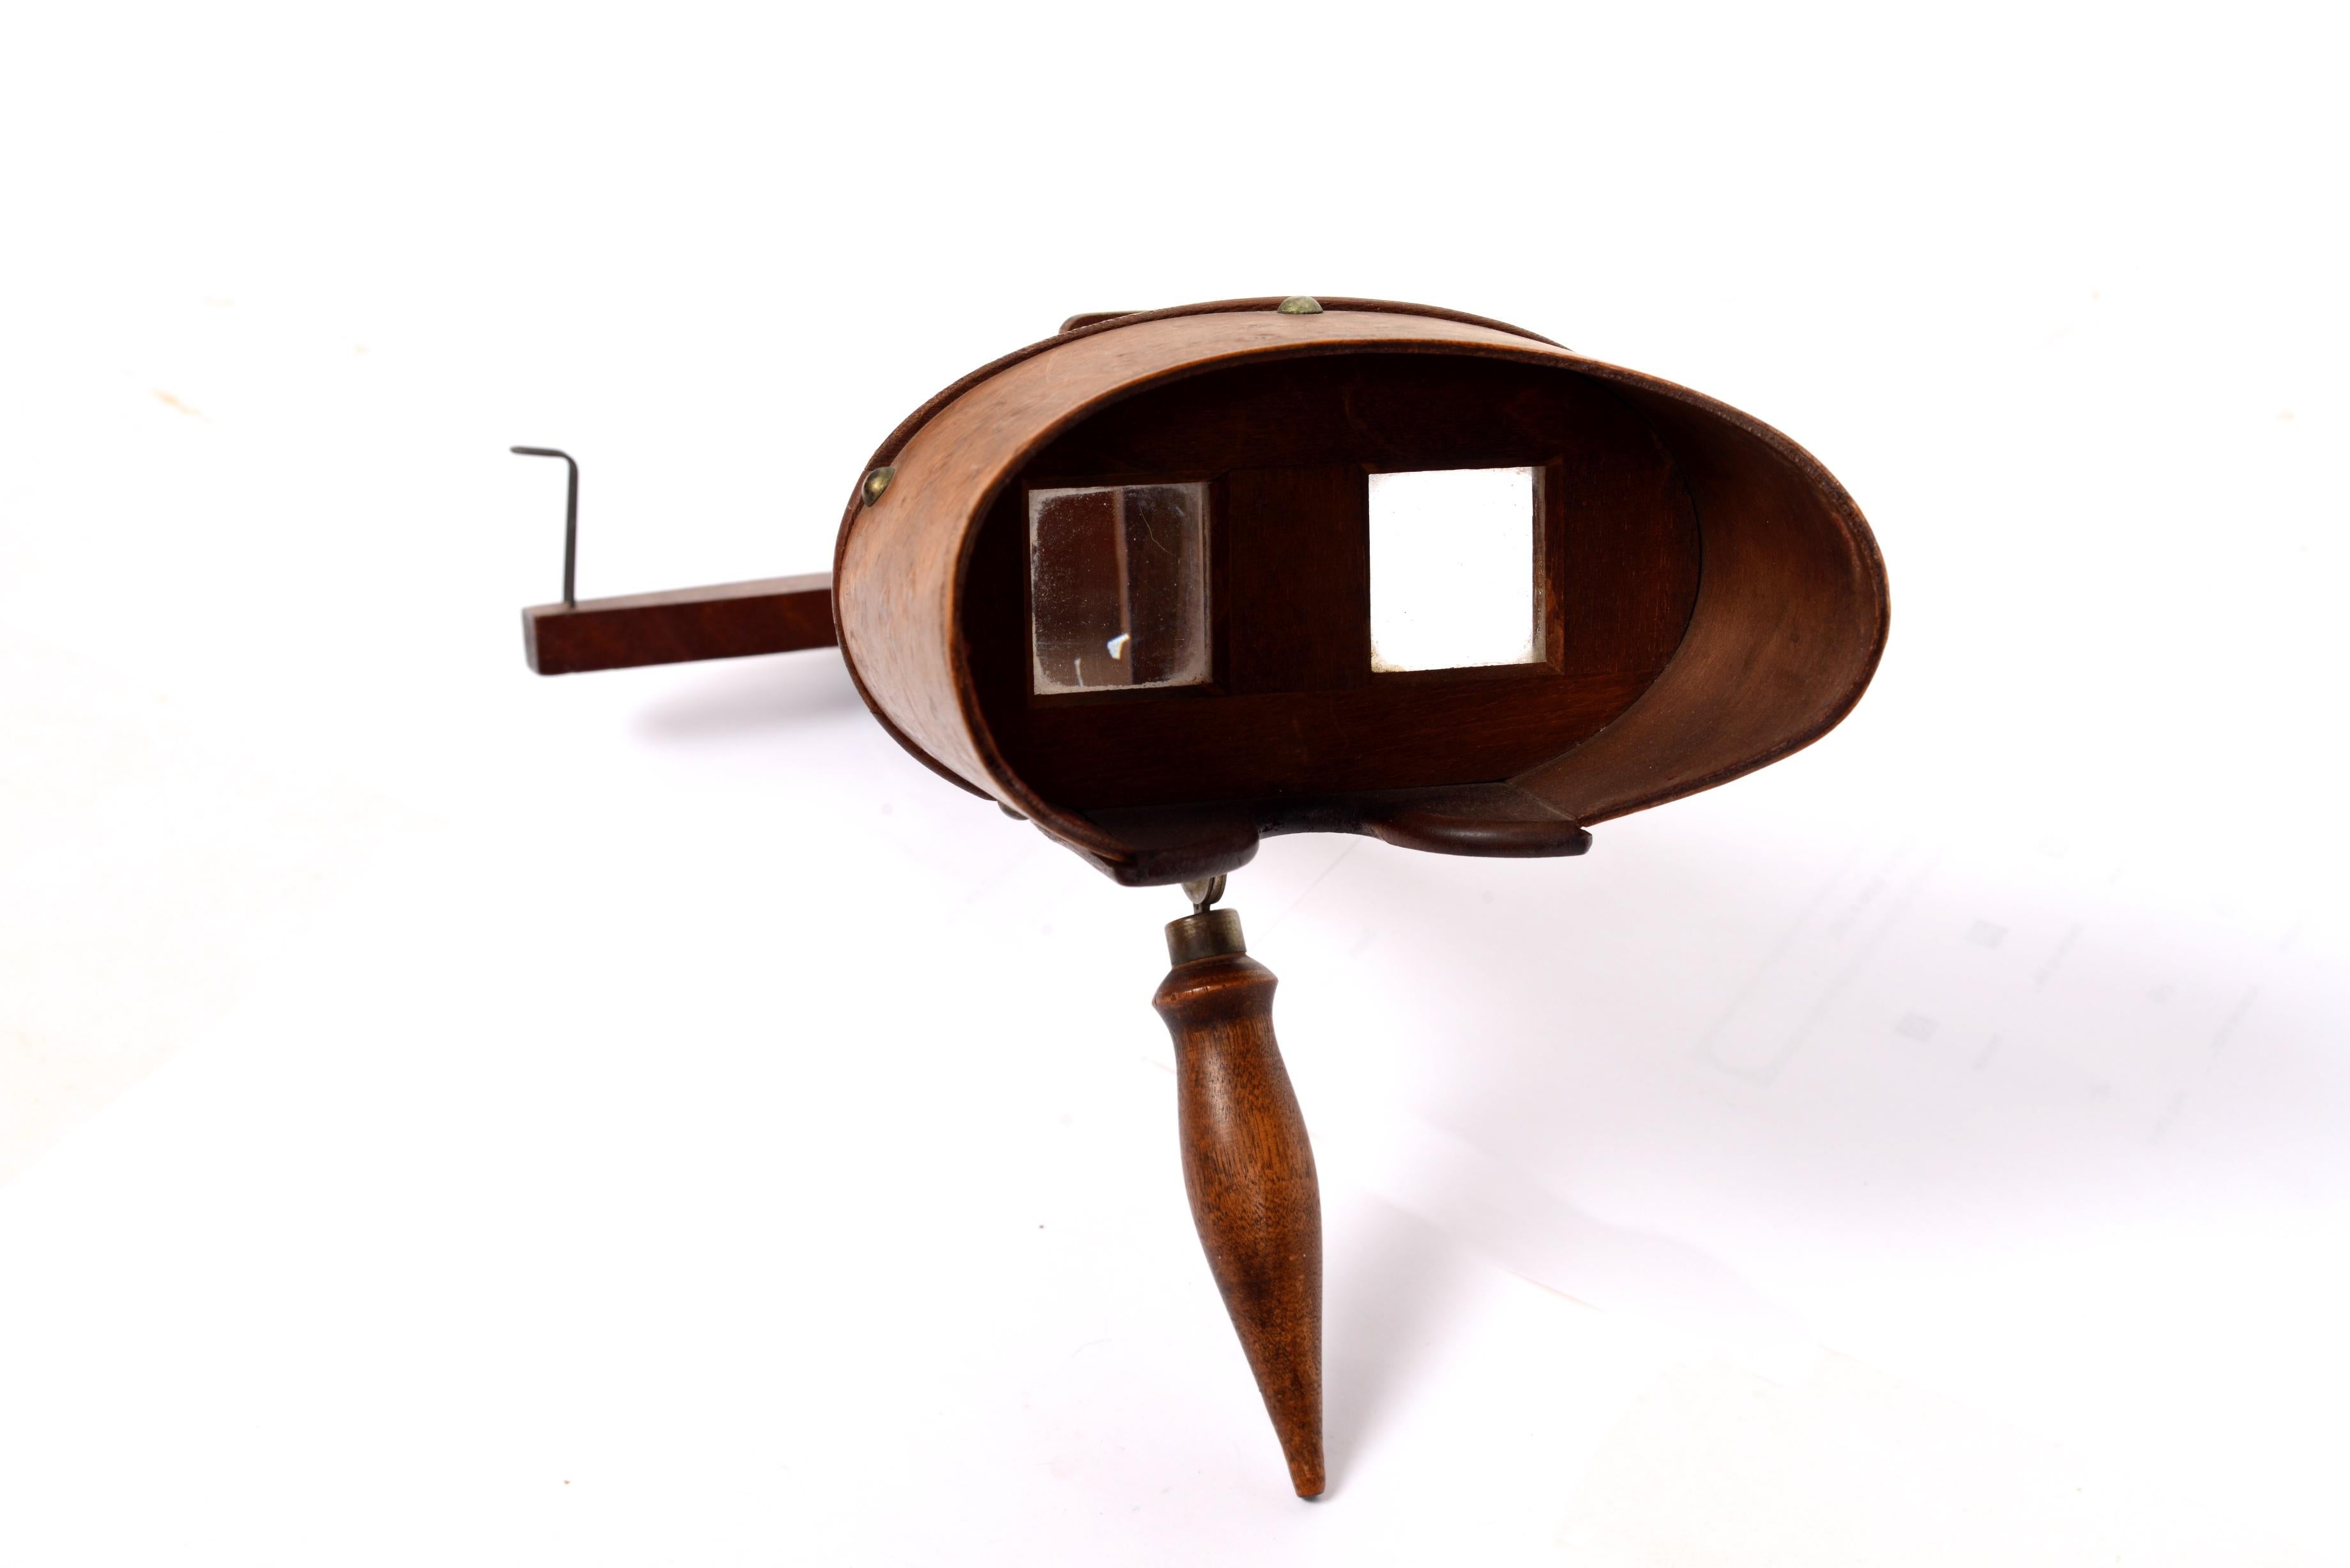 Stereoscope 3D viewfinder stereo card viewer by M.G. White Co., North Bennington VT, signed and dated, August 1904. In 1861 Oliver Wendell Holmes created and deliberately did not patent a handheld, streamlined, much more economical viewer than had